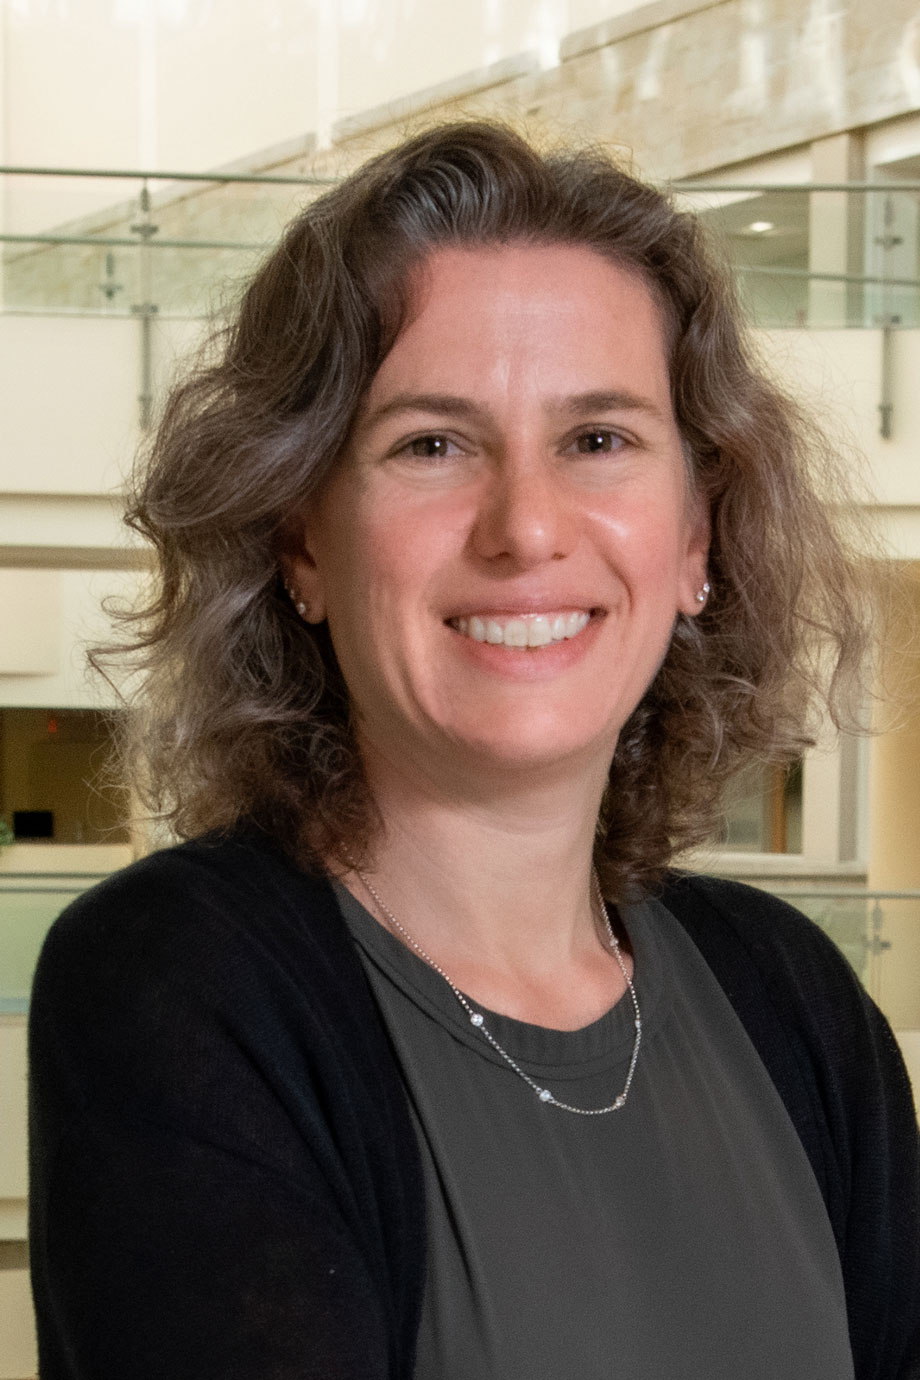 Bryk Faculty Fellow and Professor Katherine McNeill